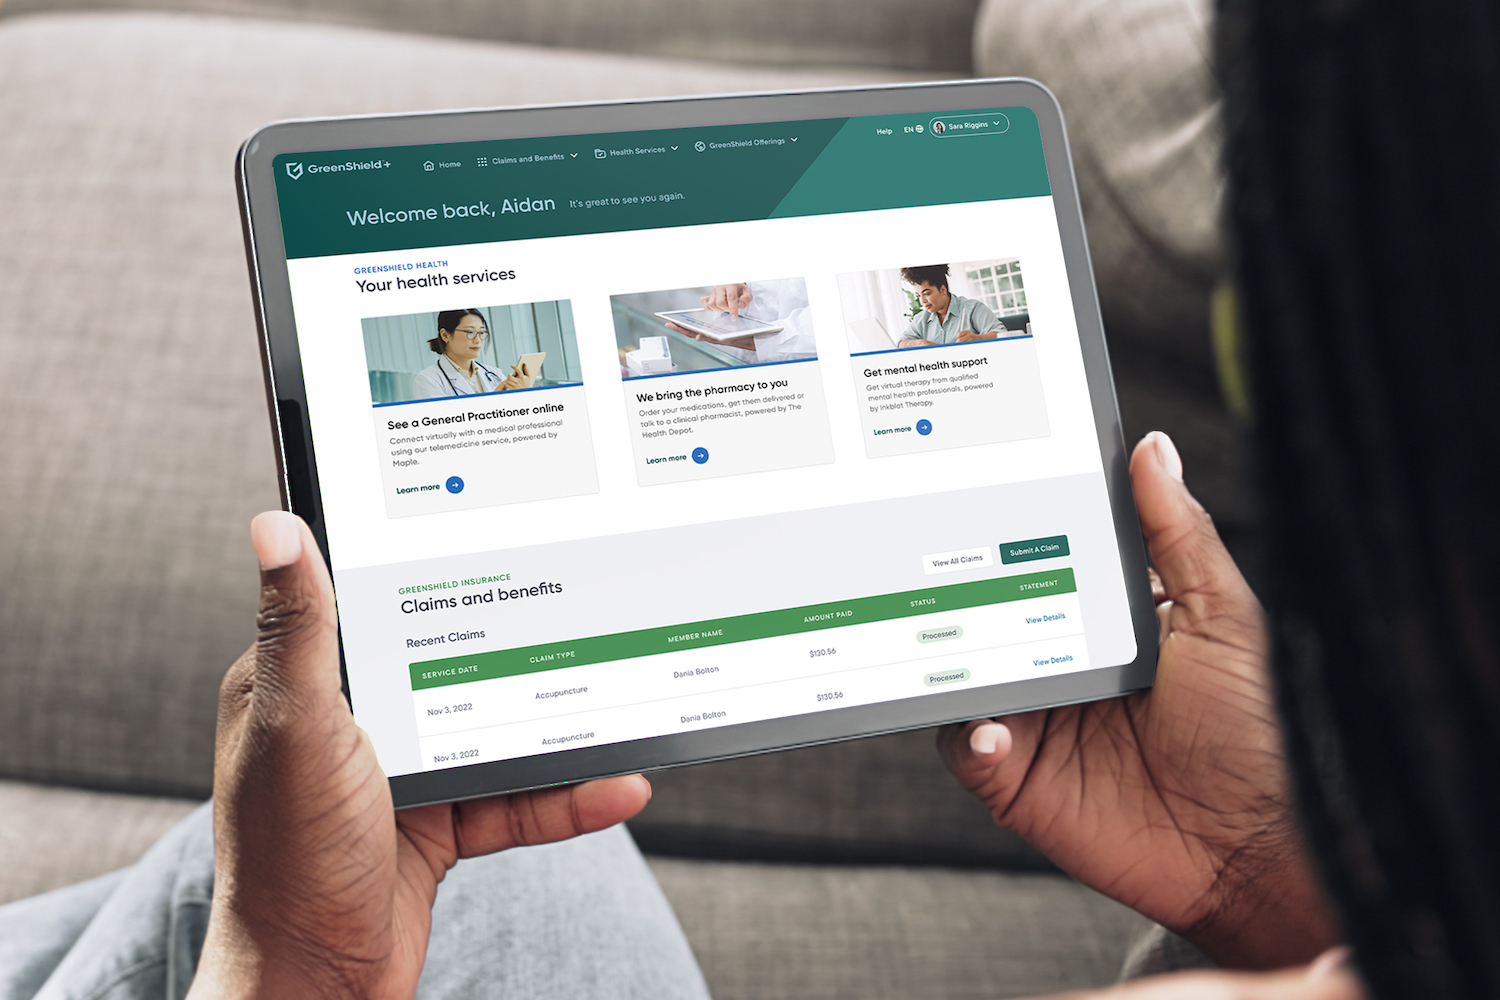 A tablet shows the GreenShield+ app. There are three widgets: See a general practitioner online; we bring the pharmacy to you; get mental health support